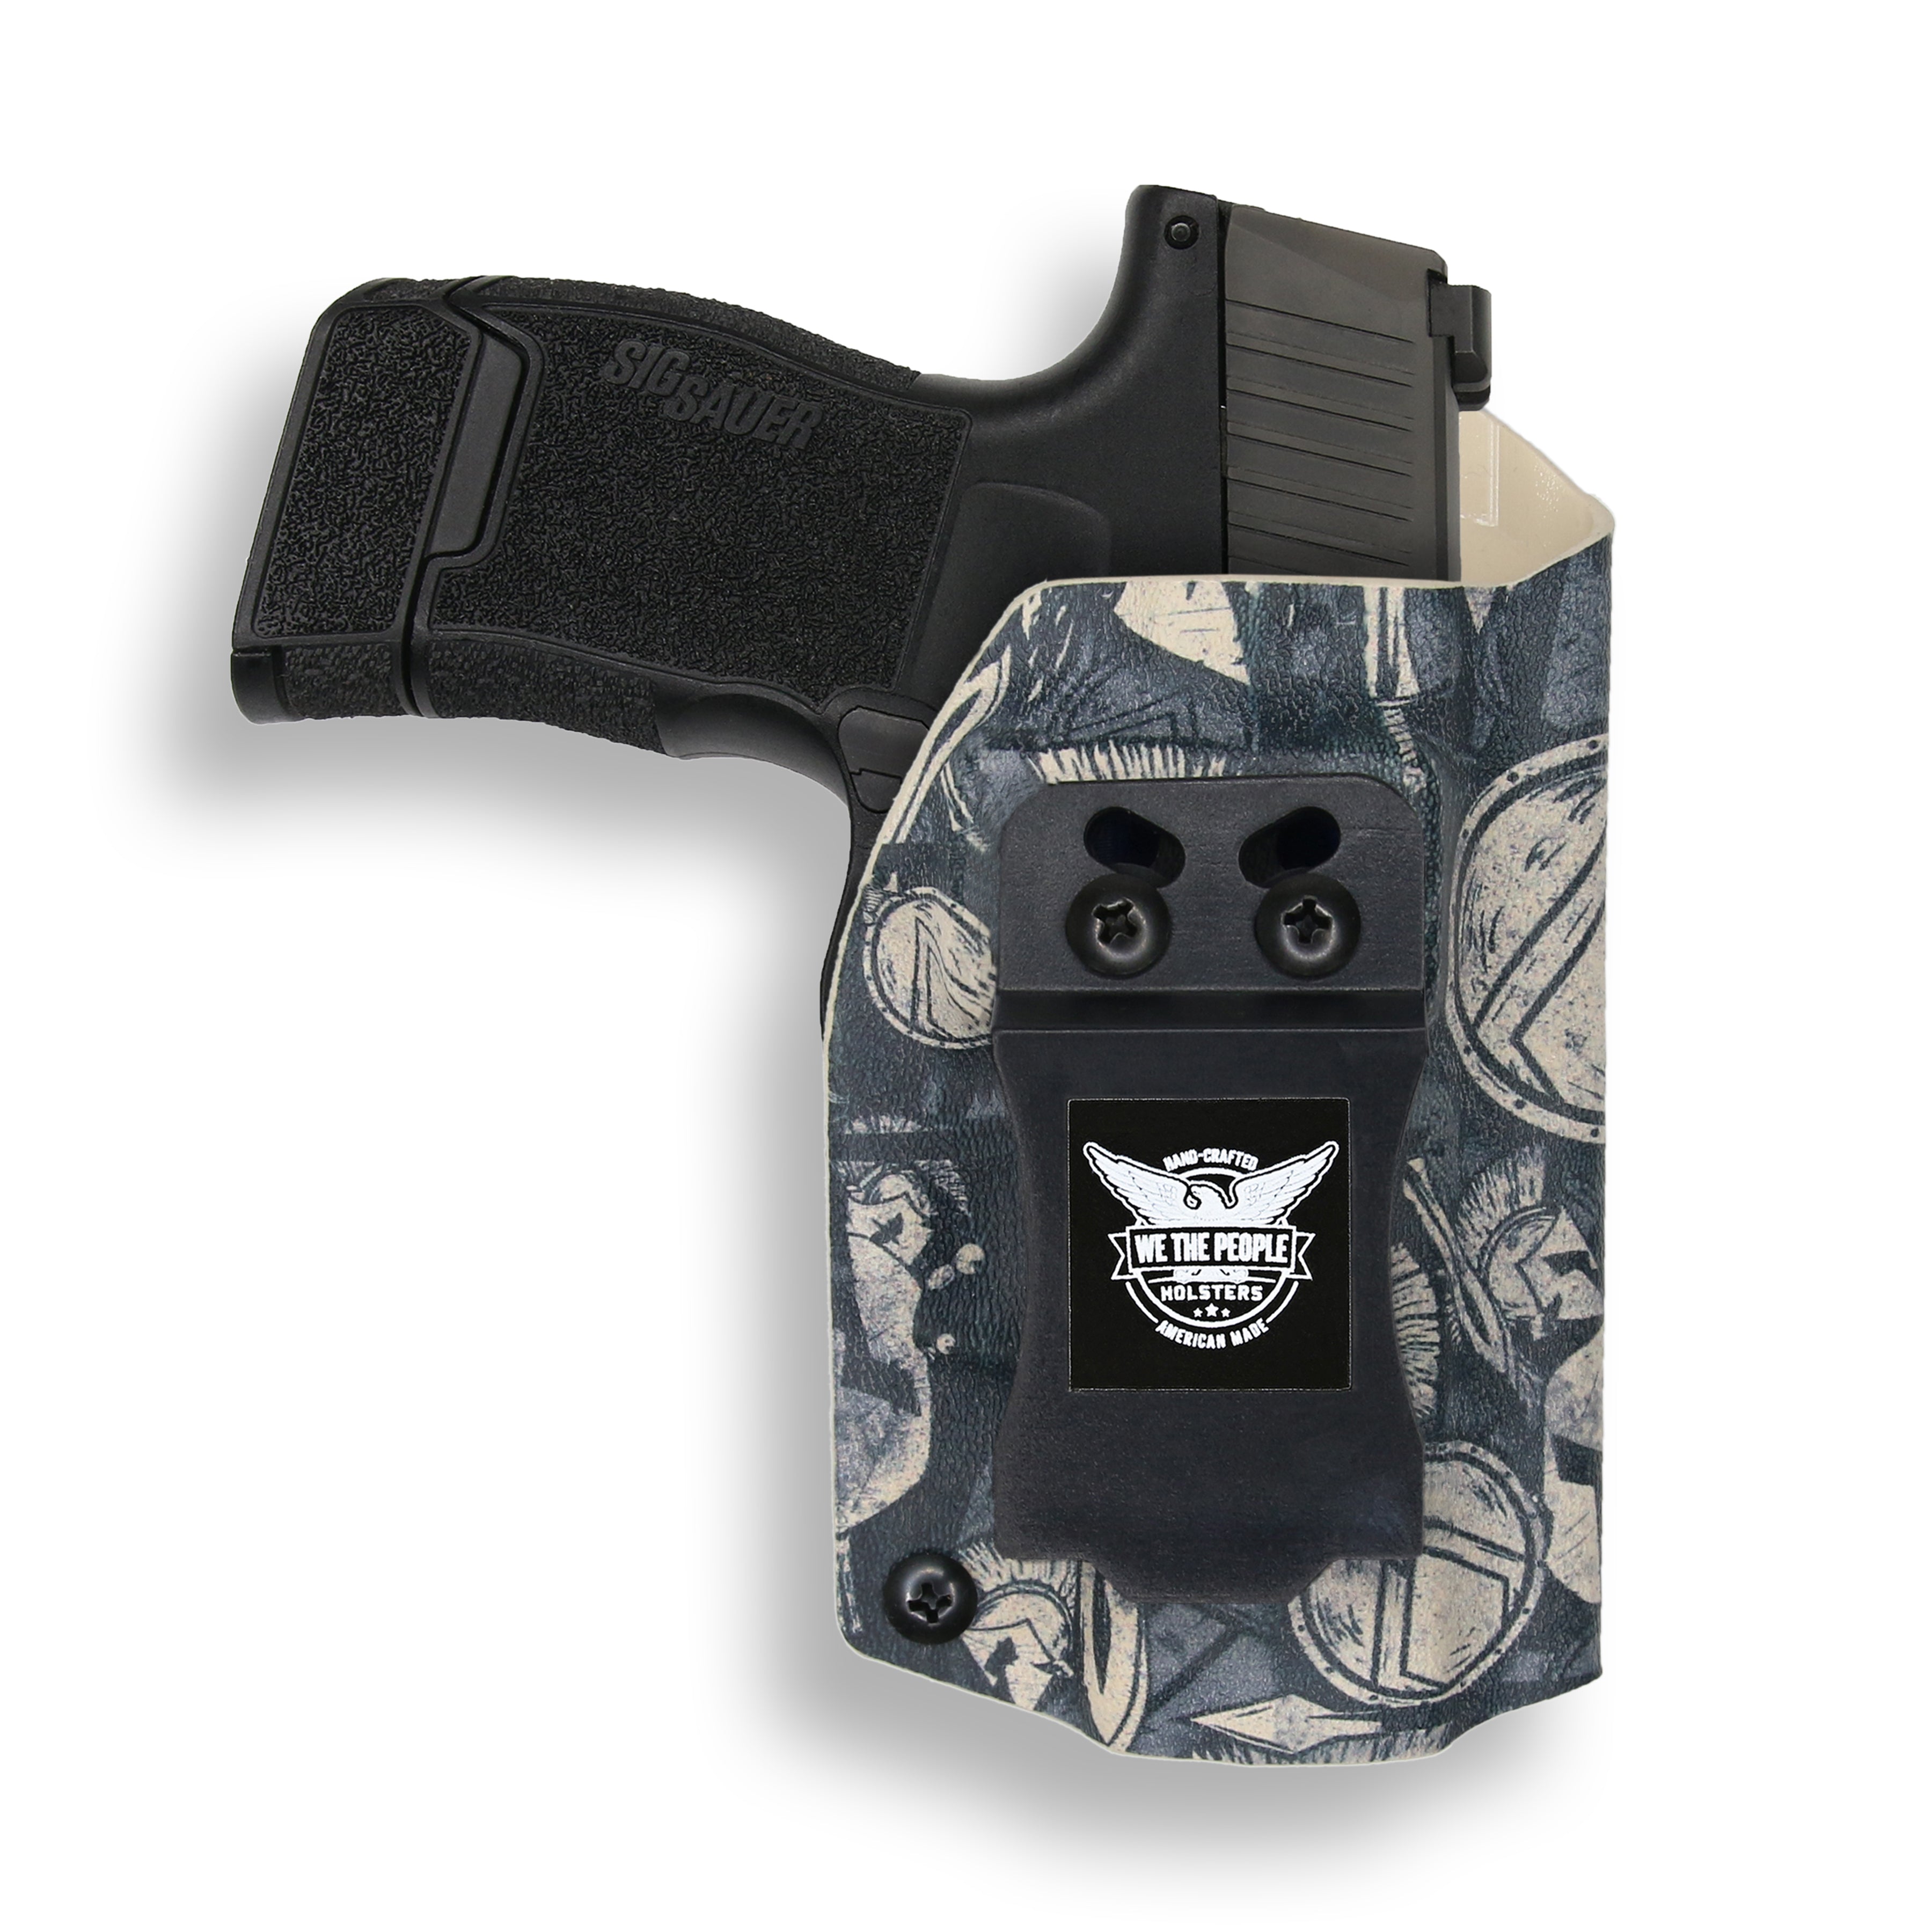 We The People Holsters - A little known secret, but this camo